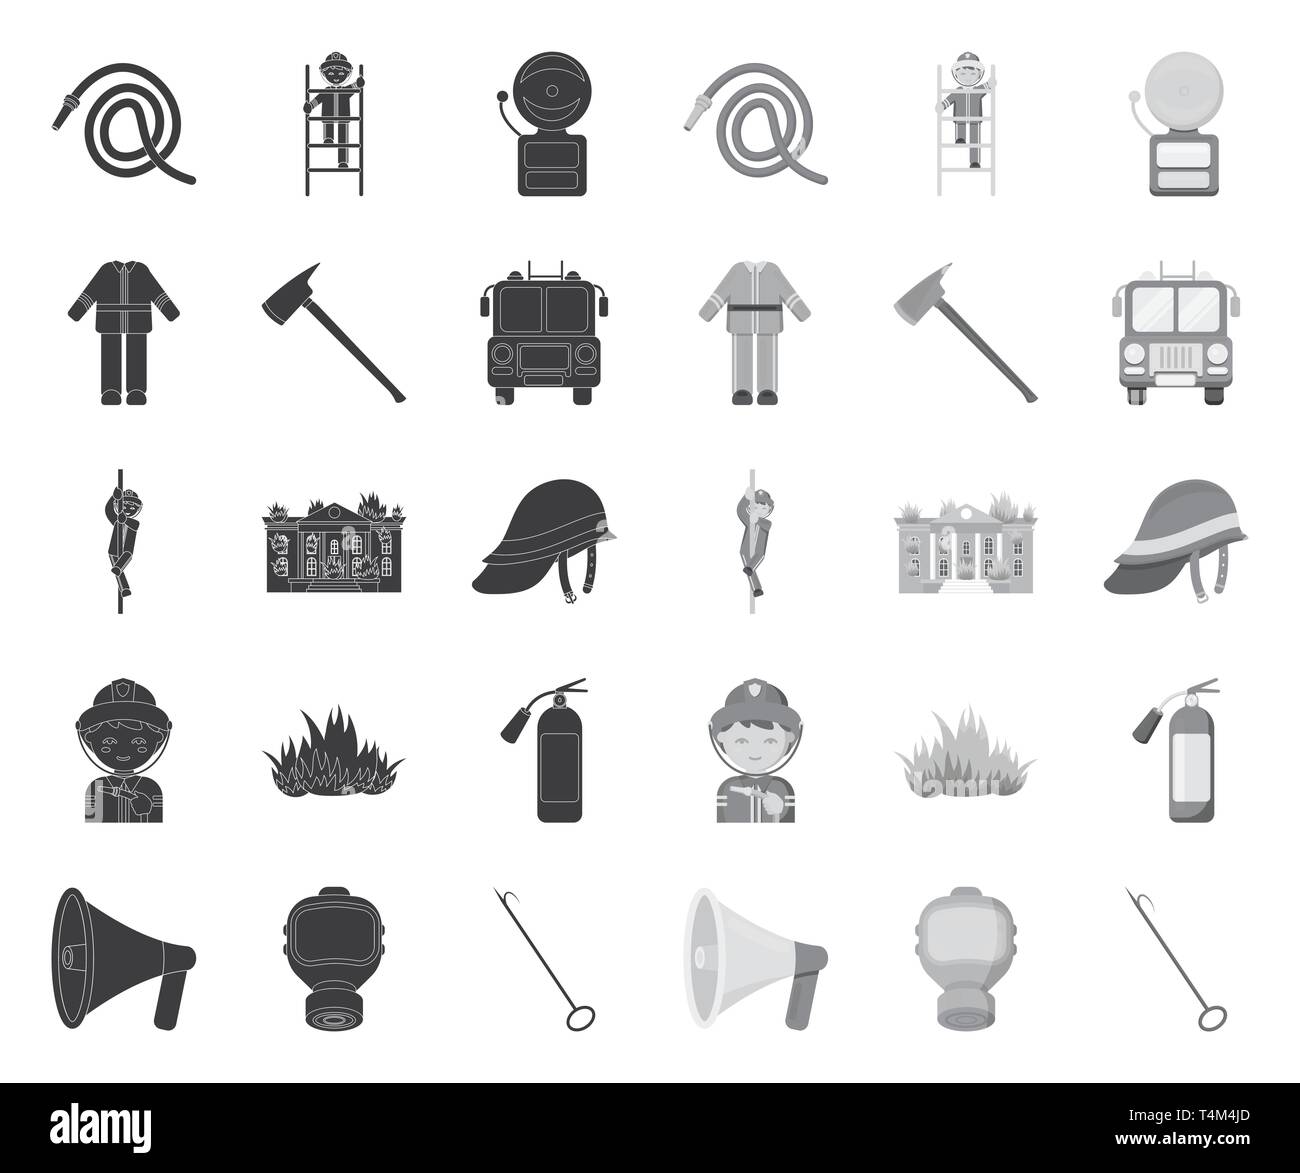 accessories,apparatus,art,attribute,axe,black.mono,bucket,building,bunker,collection,conical,department,design,equipment,extinguishing,extingushier,fire,firefighter,firefighting,flame,gas,gear,helmet,icon,illustration,isolated,logo,mask,organization,pike,pole,pump,ring,separation,service,set,sign,slide,symbol,tools,vector,web Vector Vectors , Stock Vector